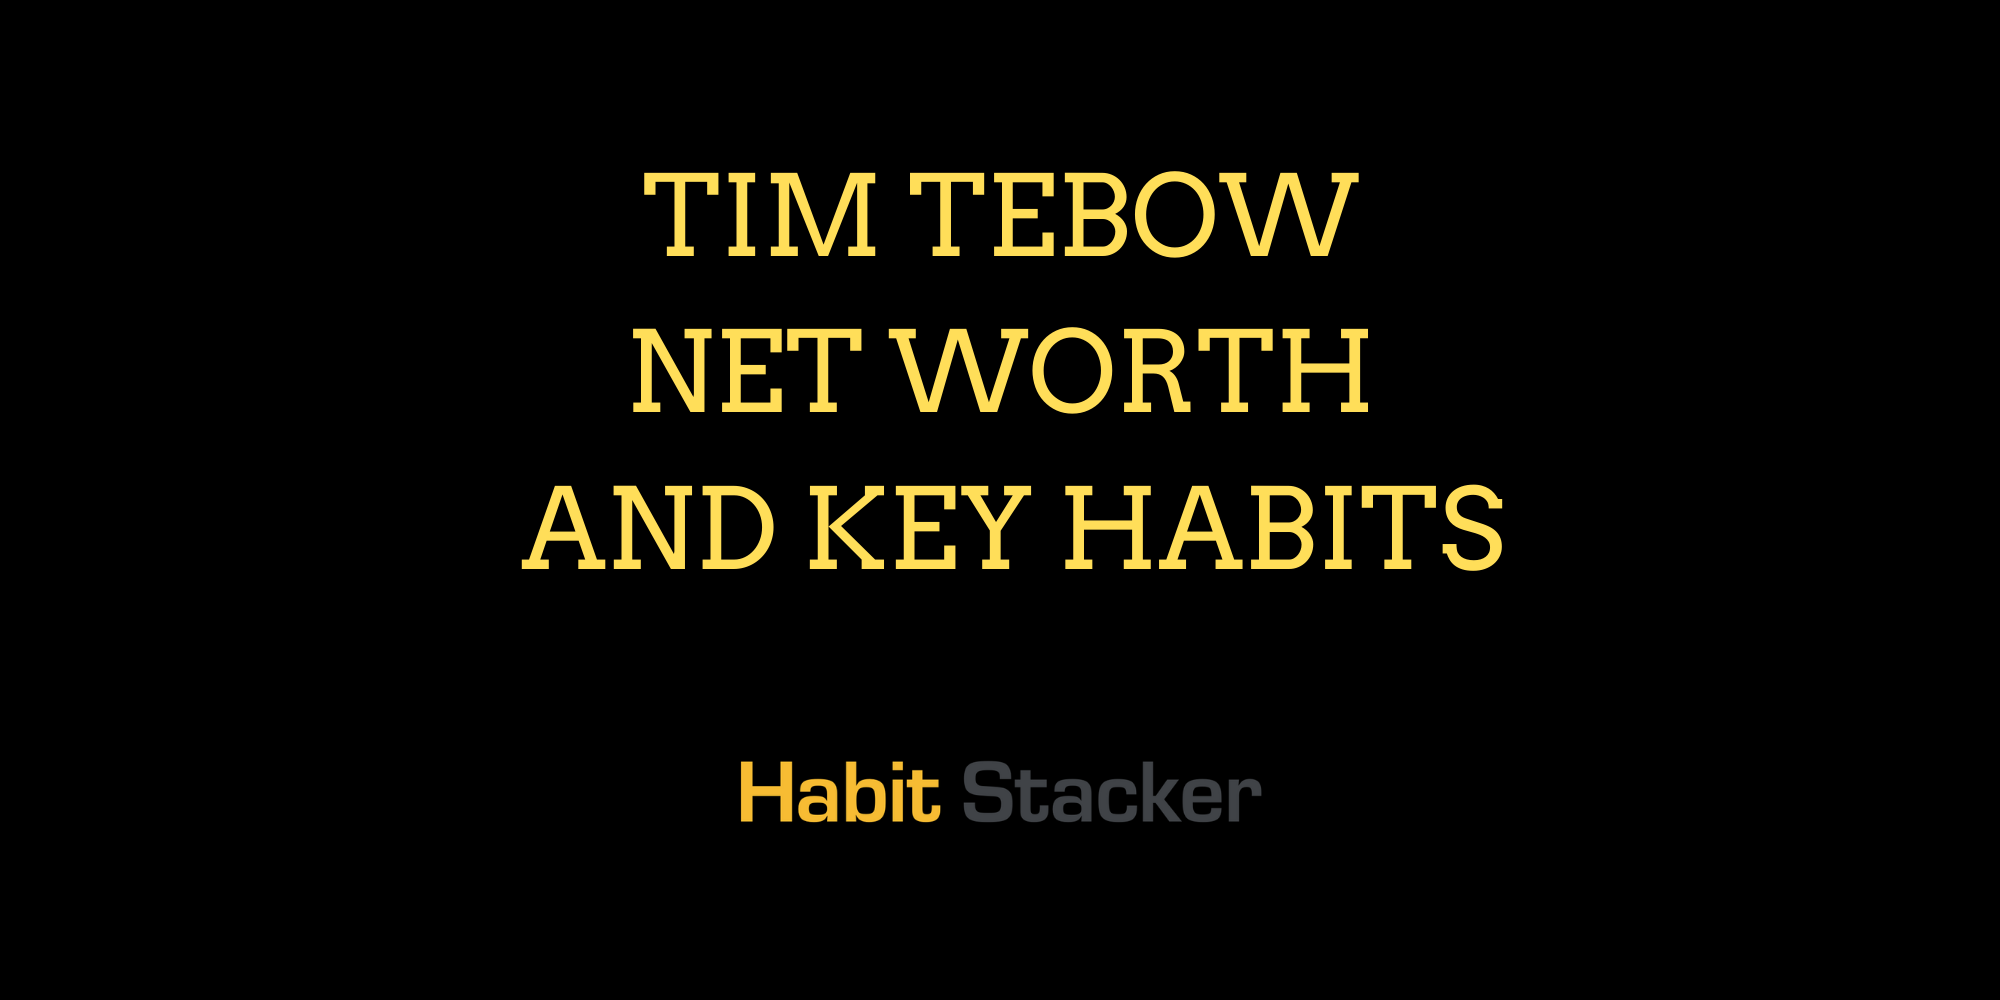 Tim Tebow Net Worth and Key Habits